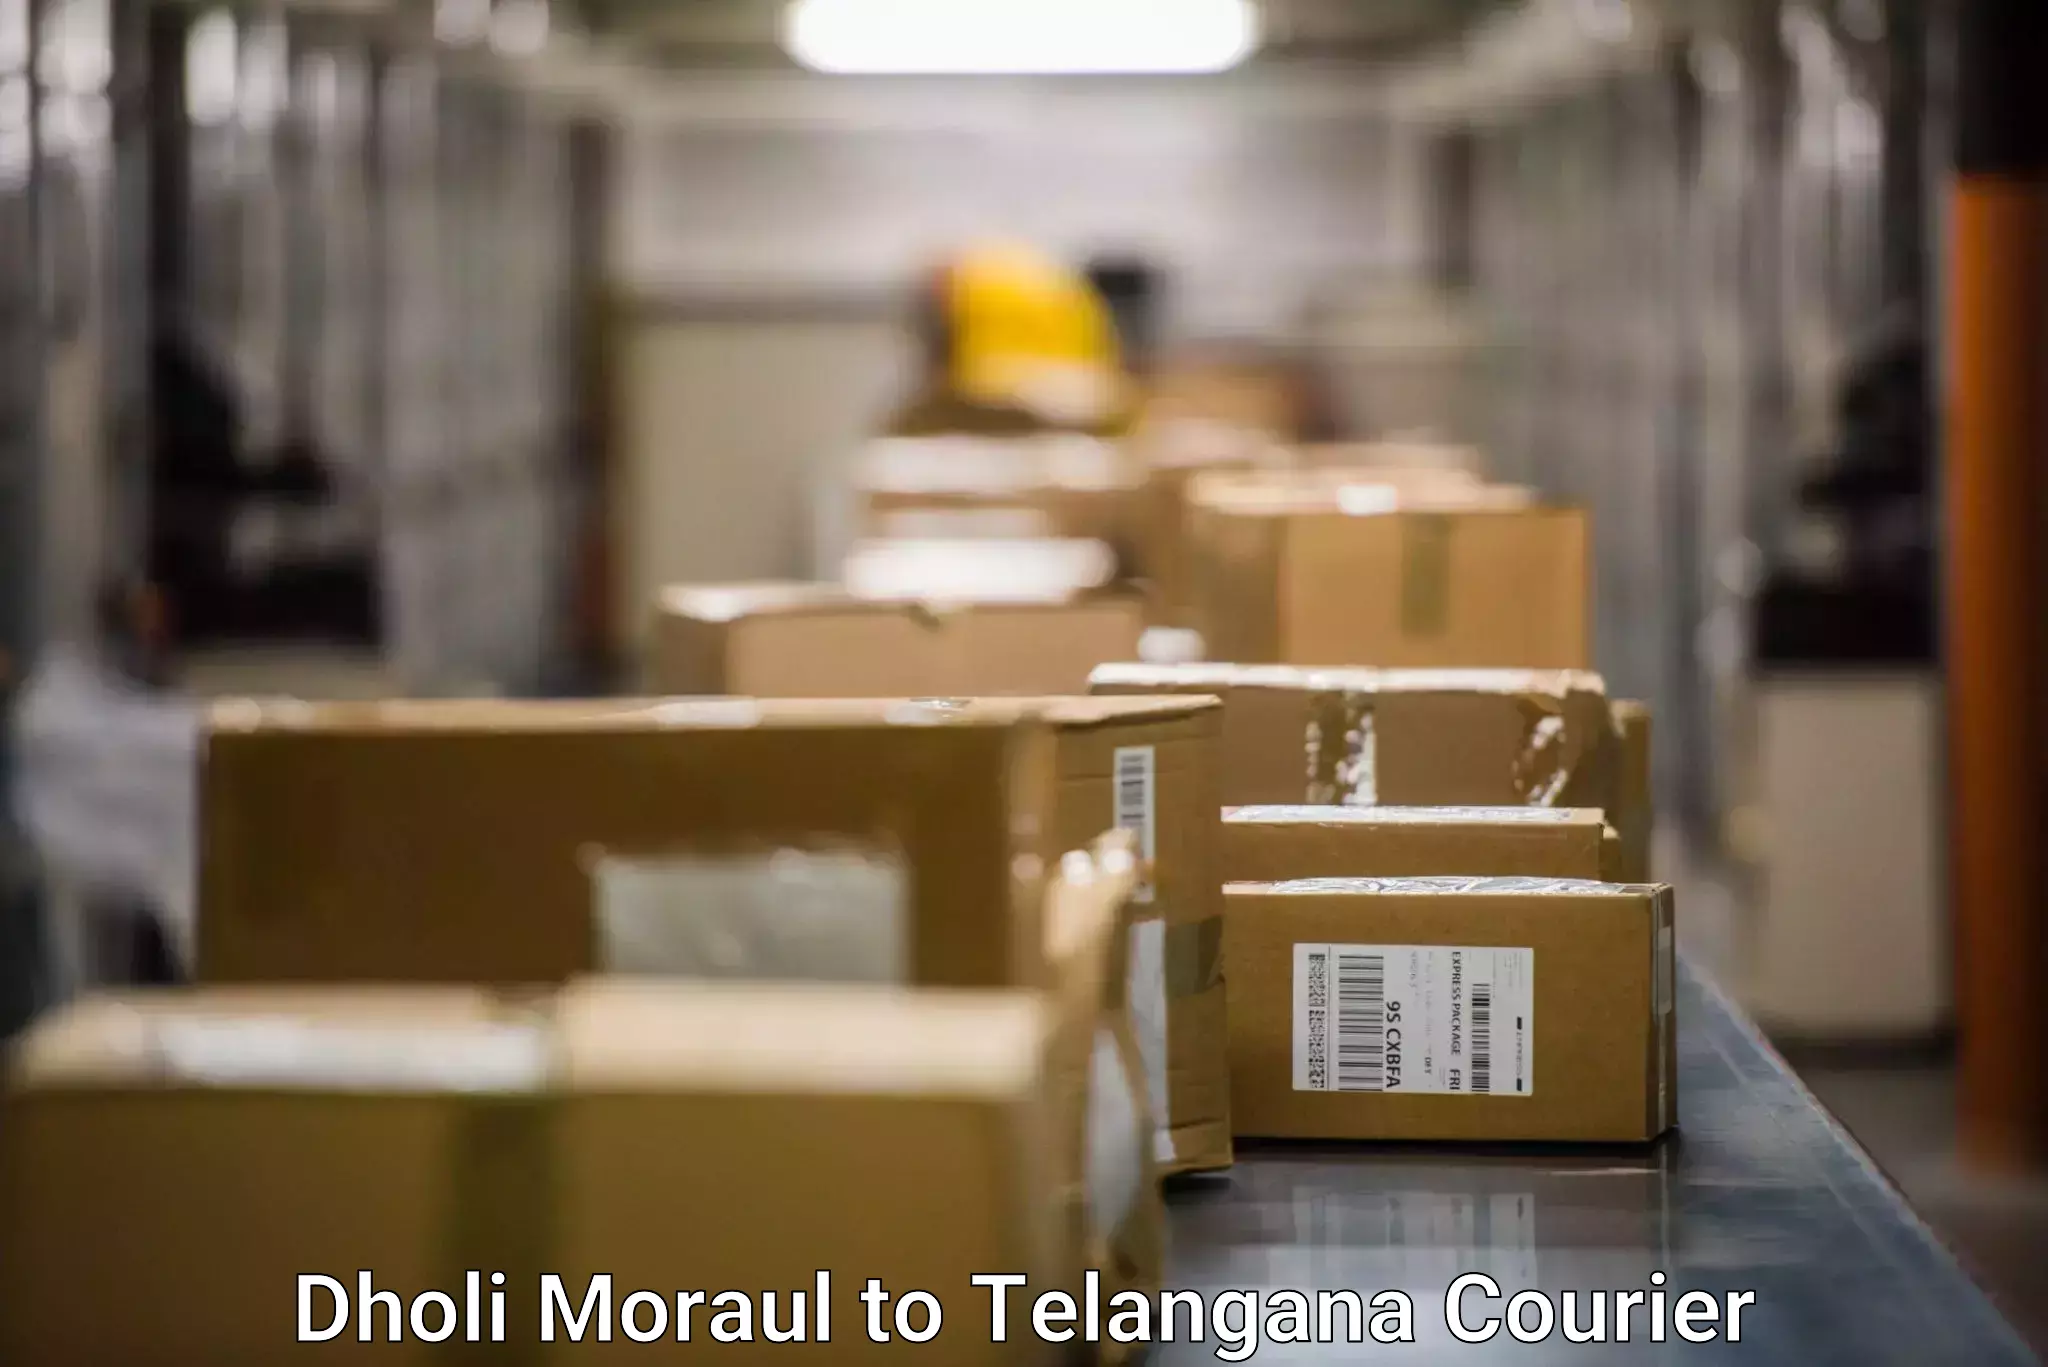 Personal parcel delivery Dholi Moraul to Nereducharla